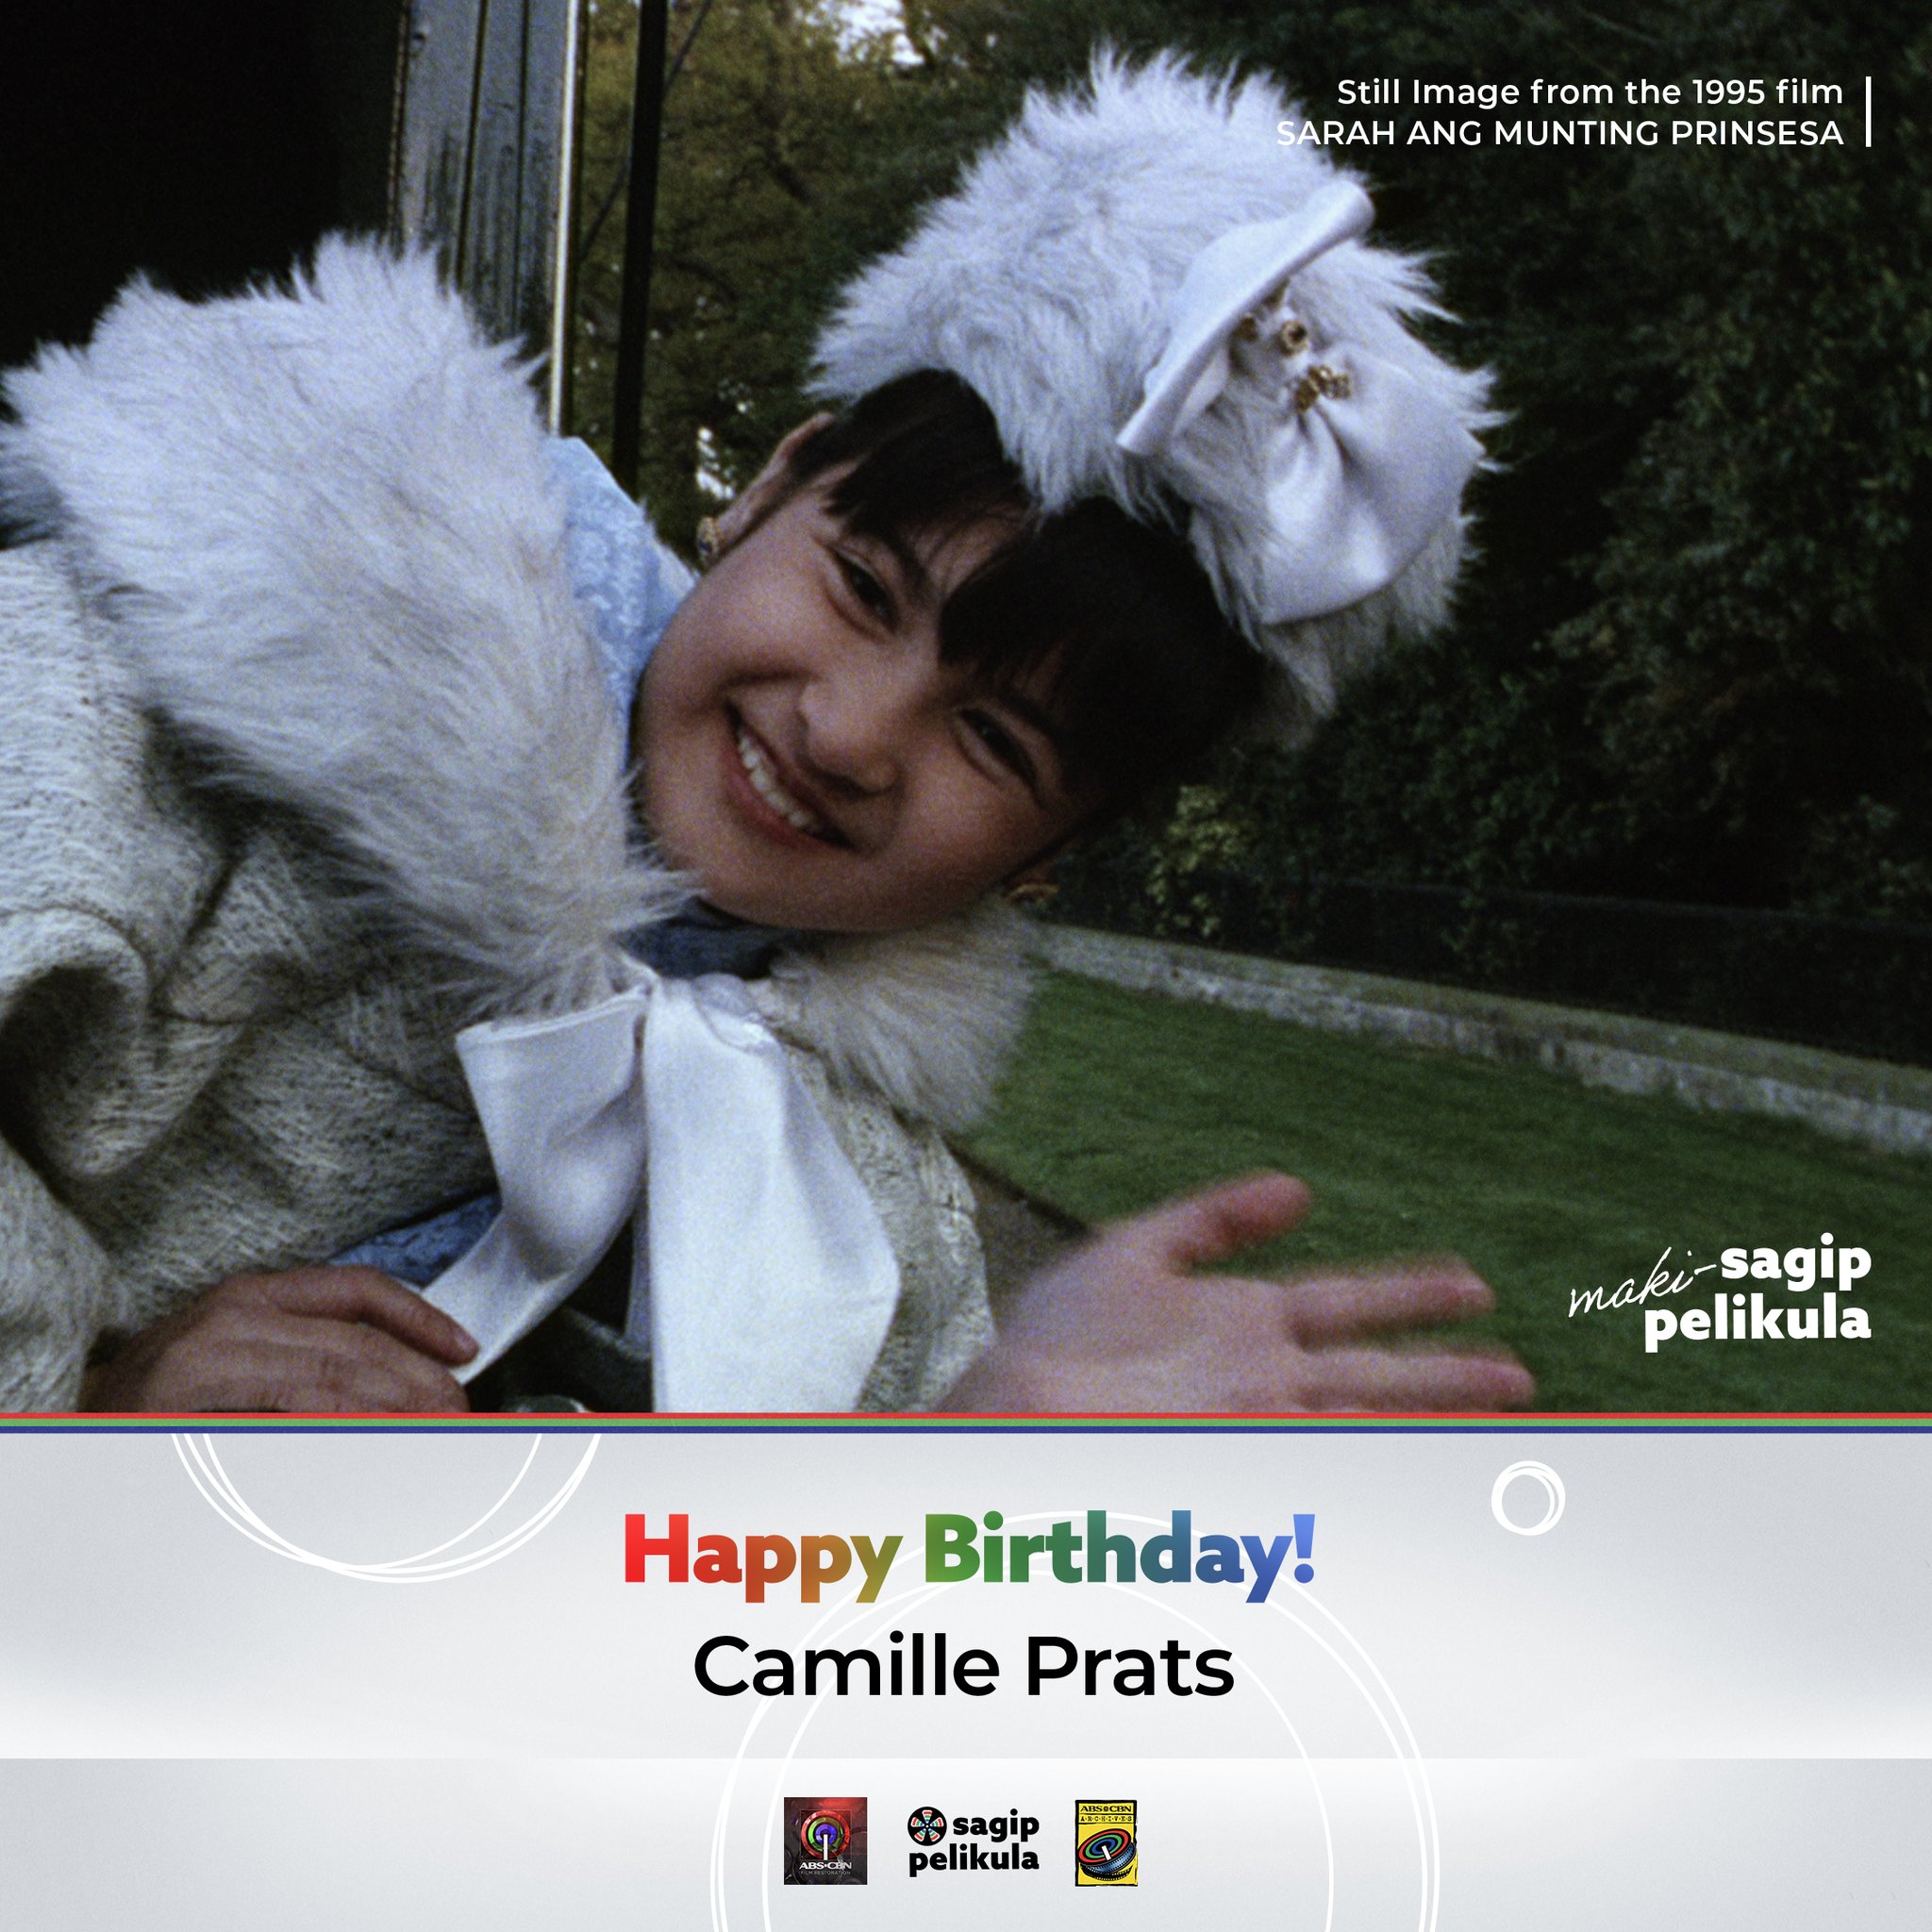 Happy birthday to Camille Prats!

What\s your favorite film of hers?   